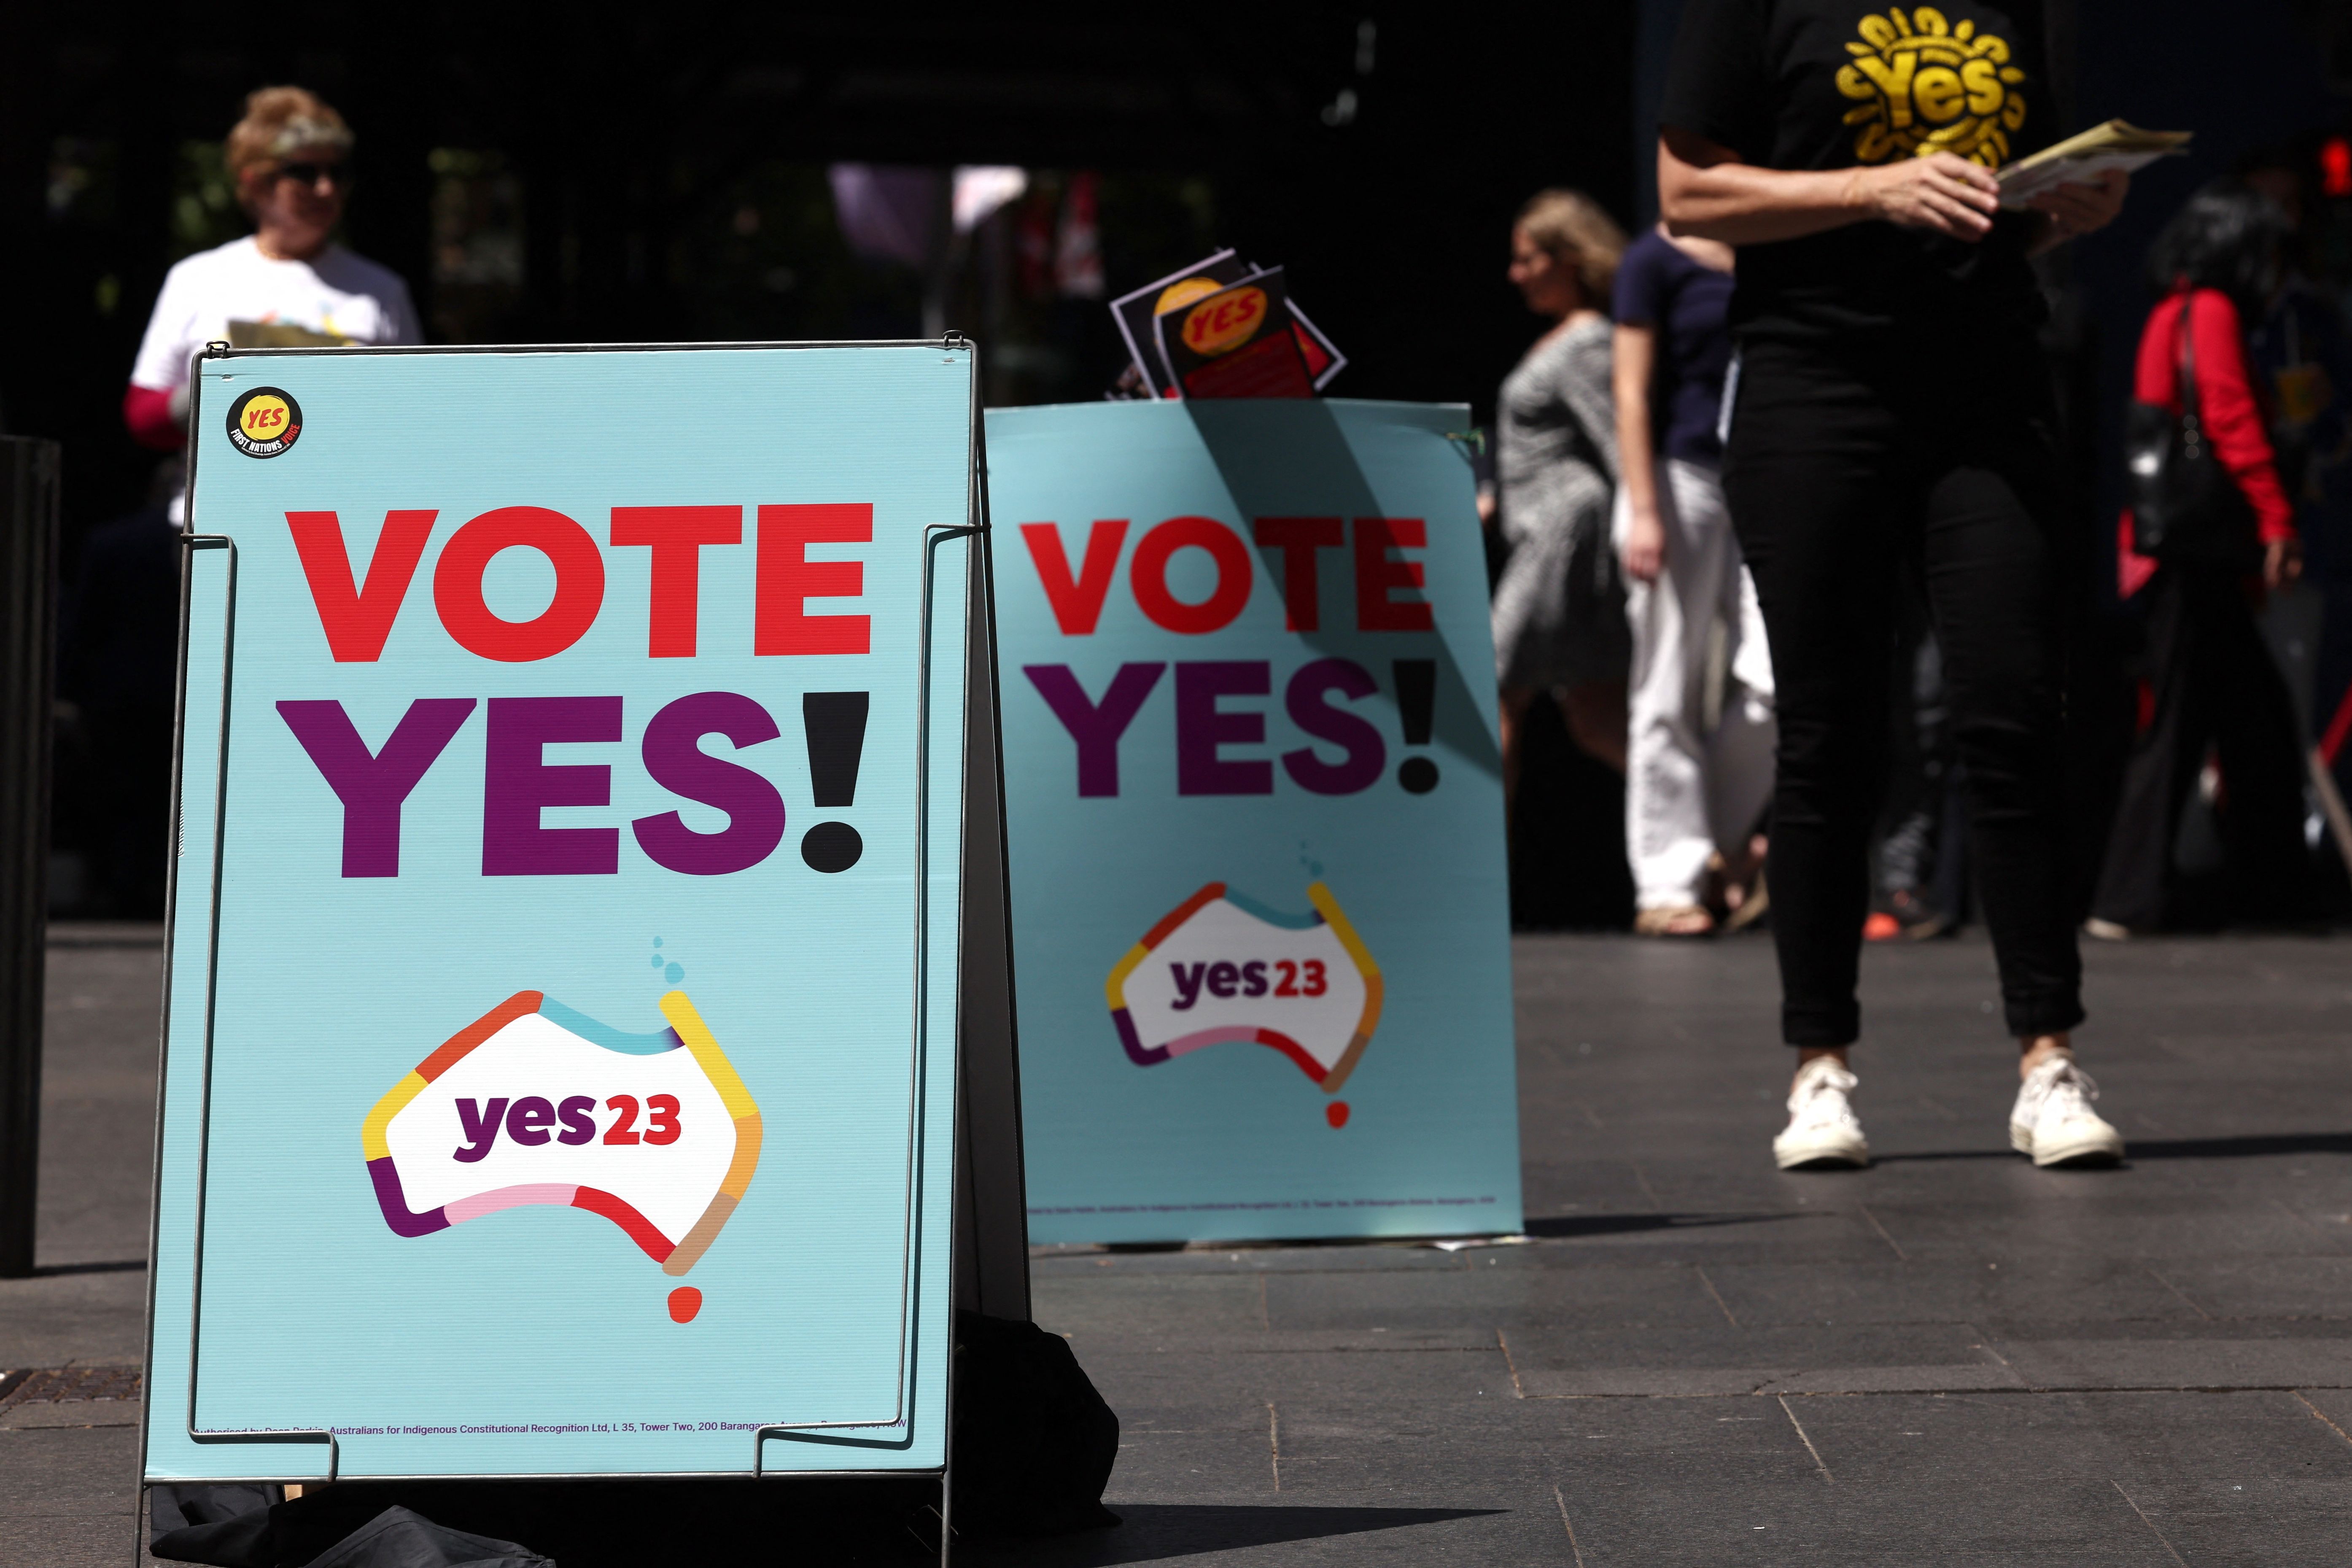 Australia's Voice Referendum: What Is It, Why Does It Matter